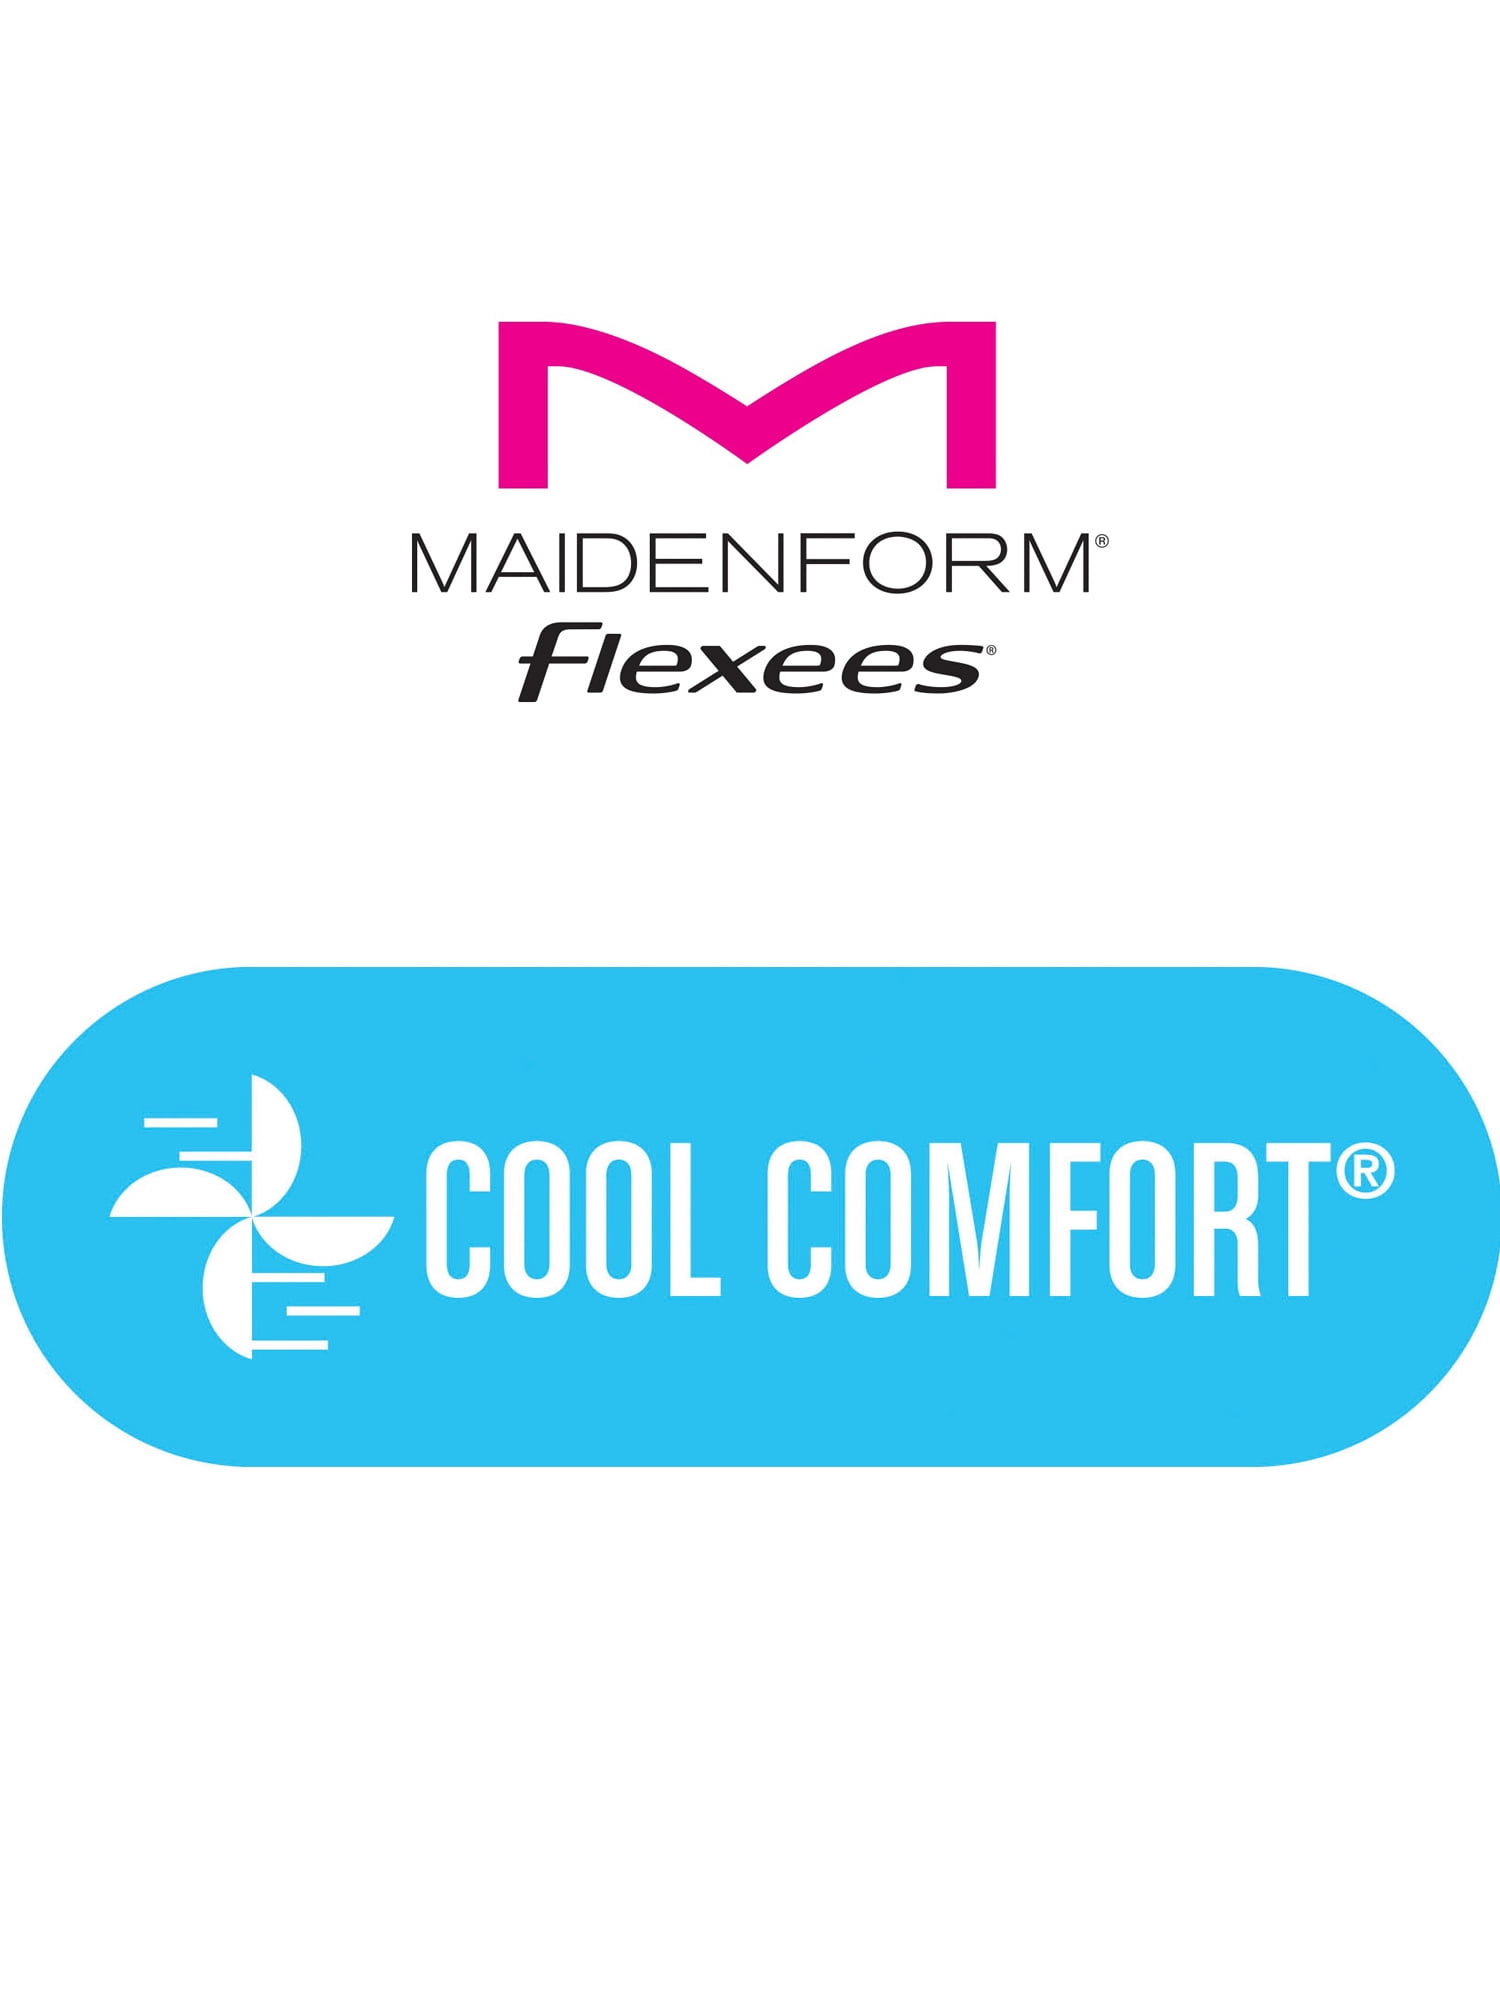 Introducing Maidenform Shapewear powered by LYCRA® FitSense™ technology